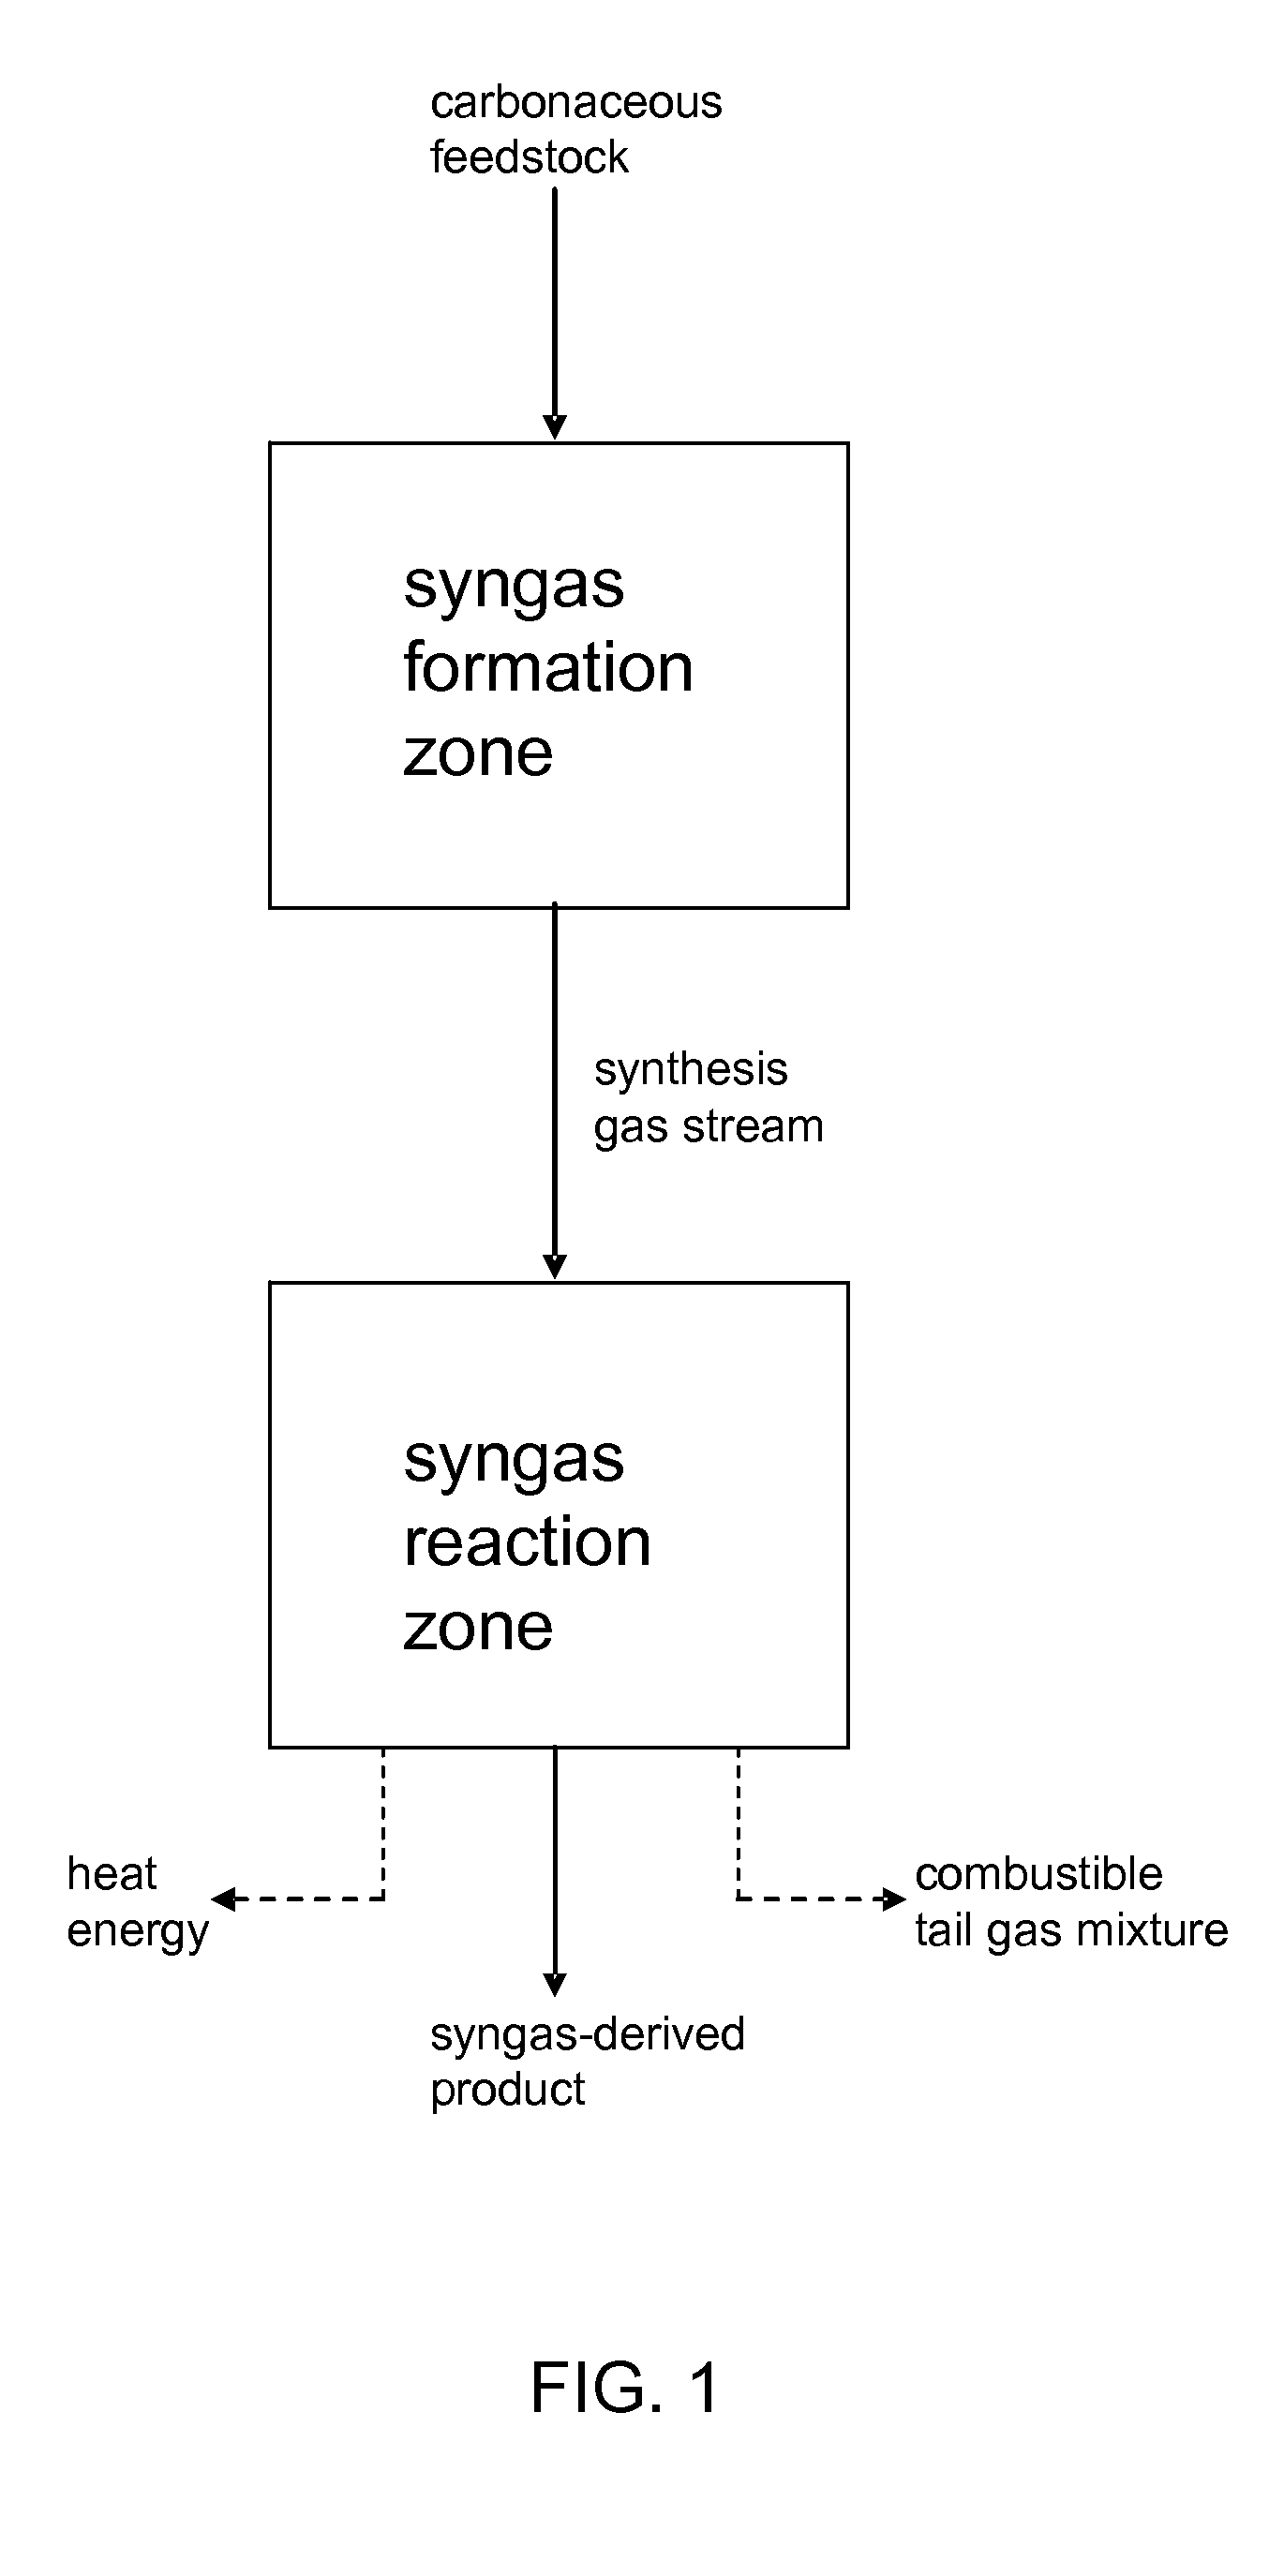 Processes for Making Syngas-Derived Products